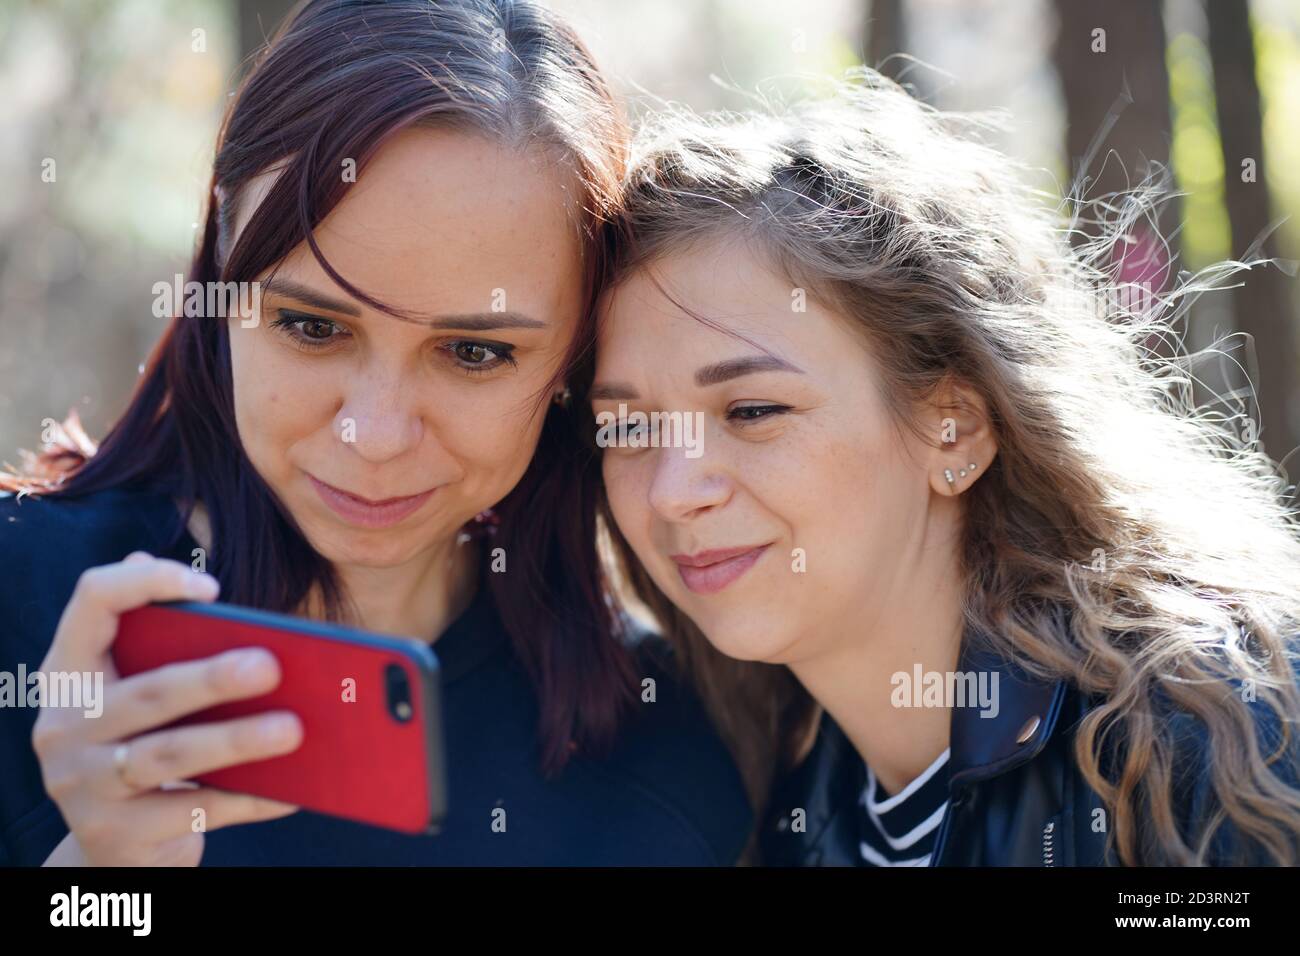 Close up of young women browsing mobile phone in wood. Pretty females gossip, looking in smartphone. Concept of meeting of girlfriends. Stock Photo